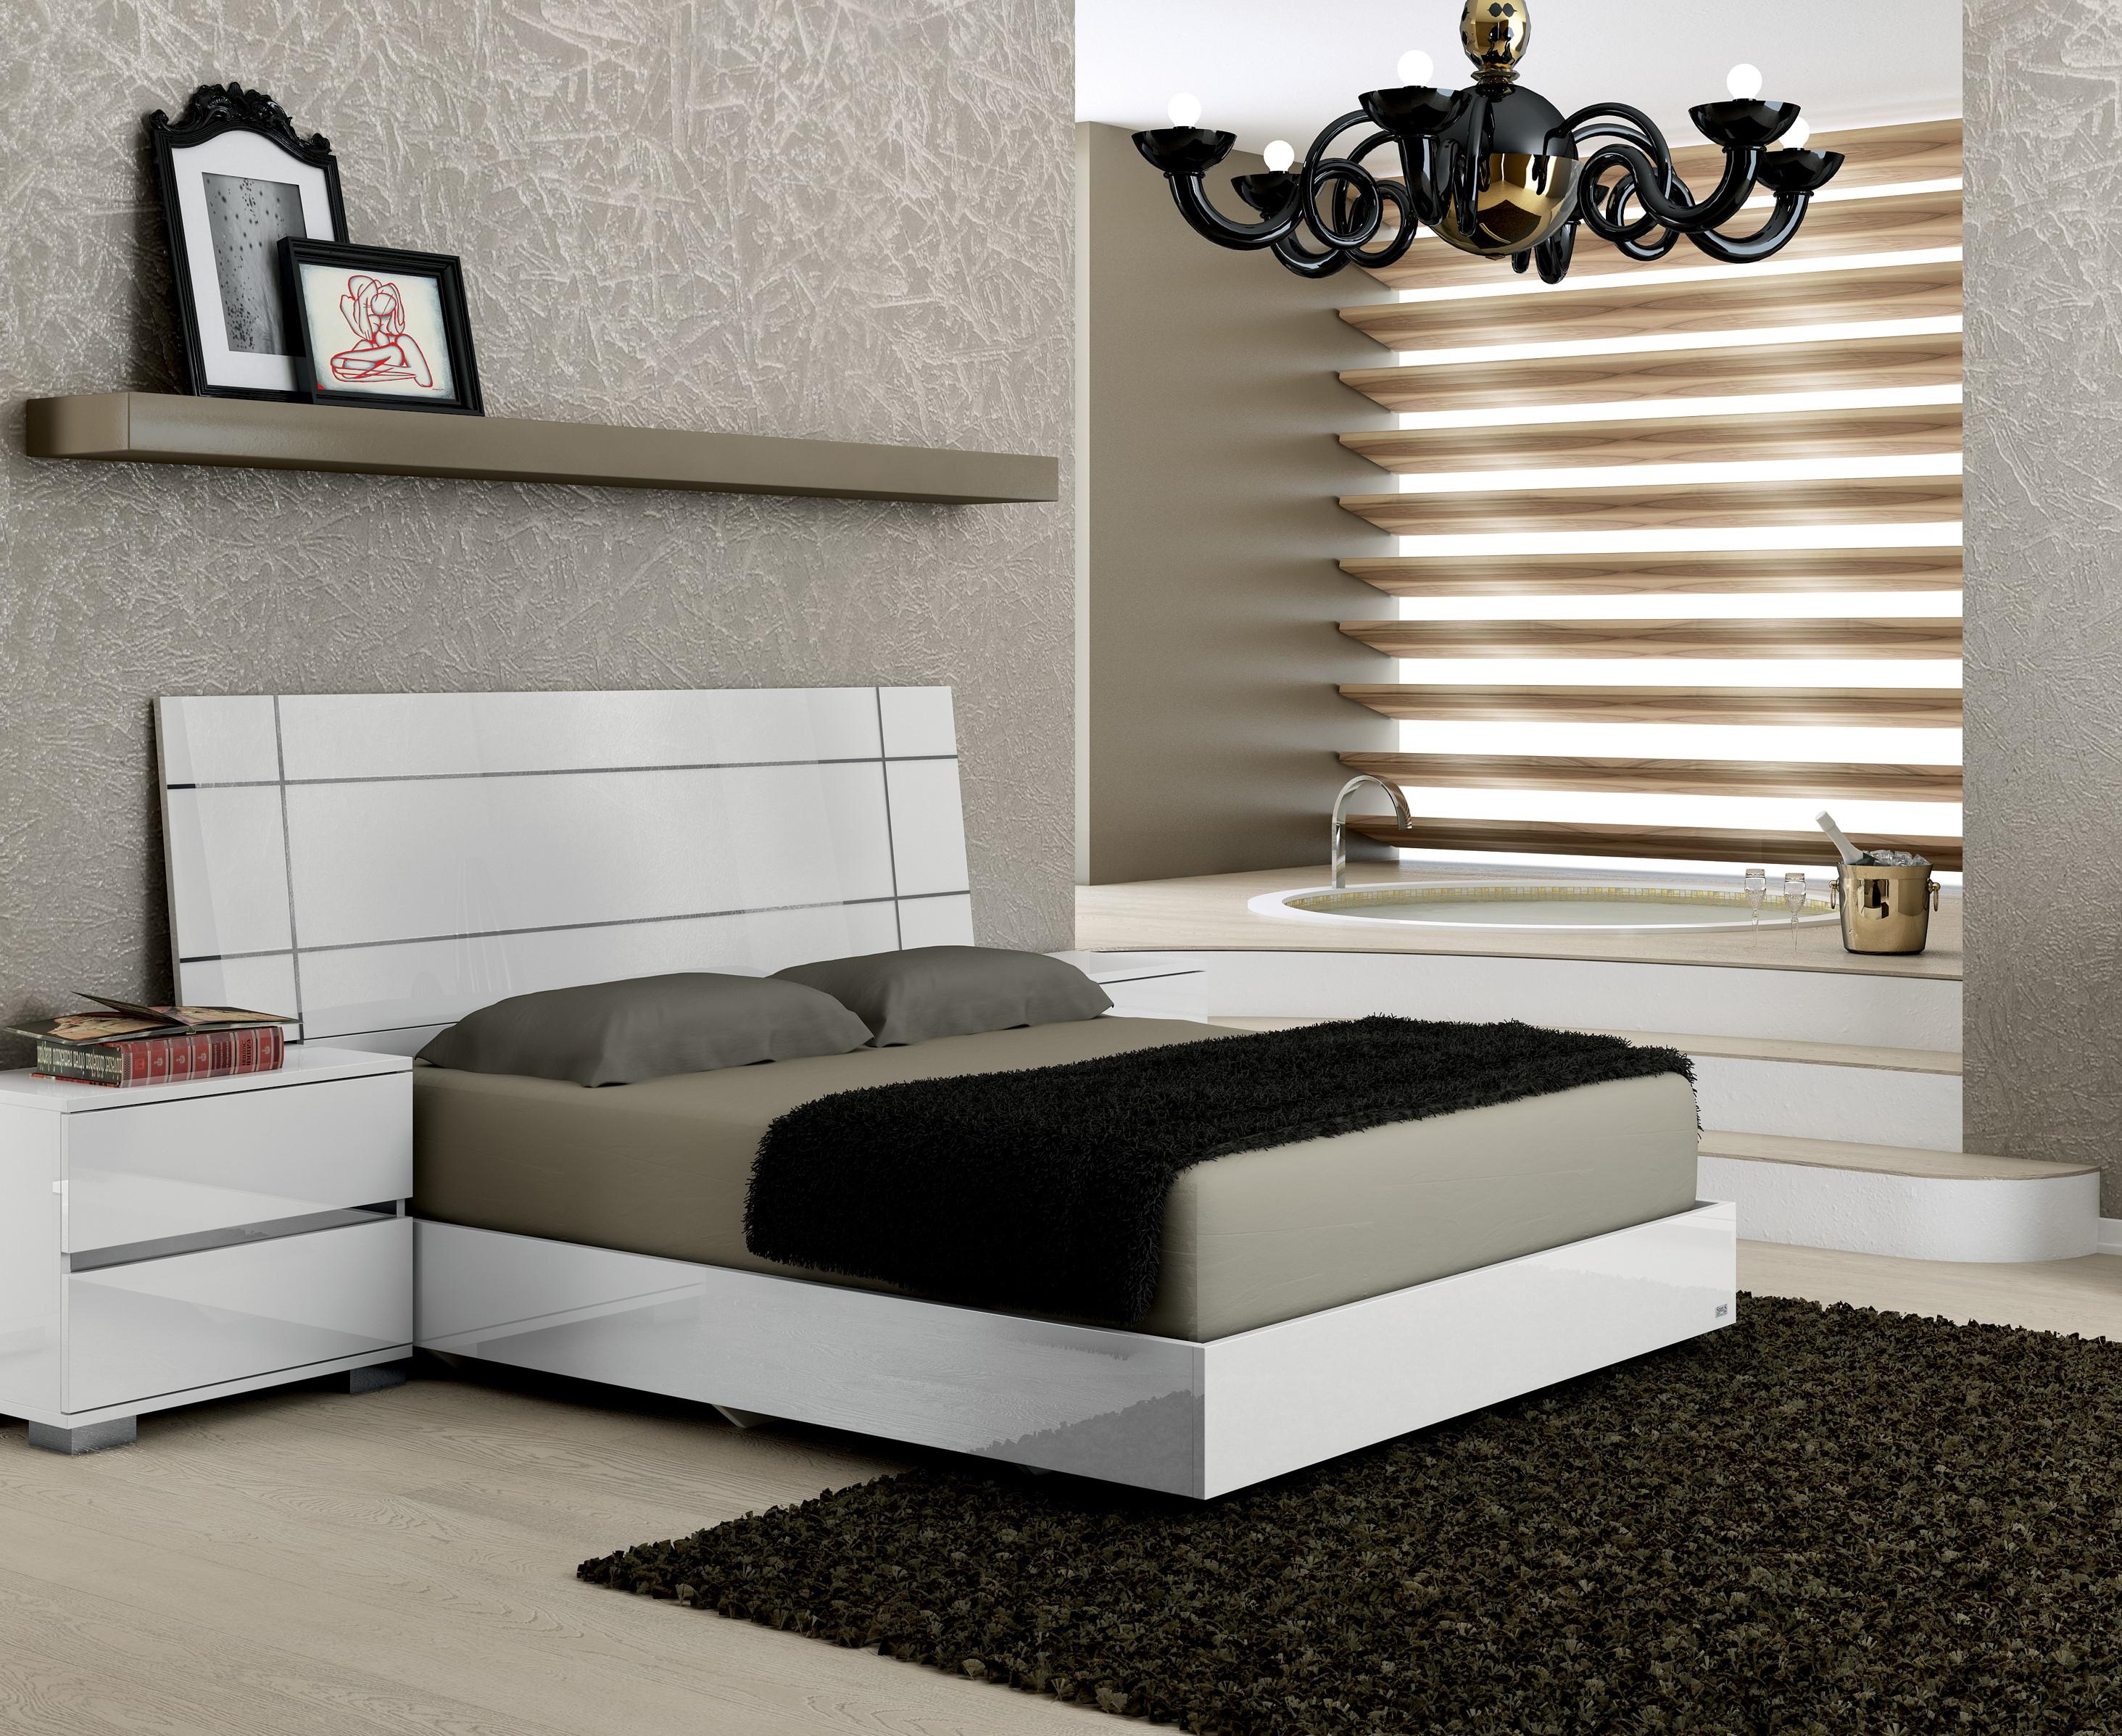 

    
At Home USA Dream White High Gloss Lacquer Queen Bed Contemporary Made in Italy
